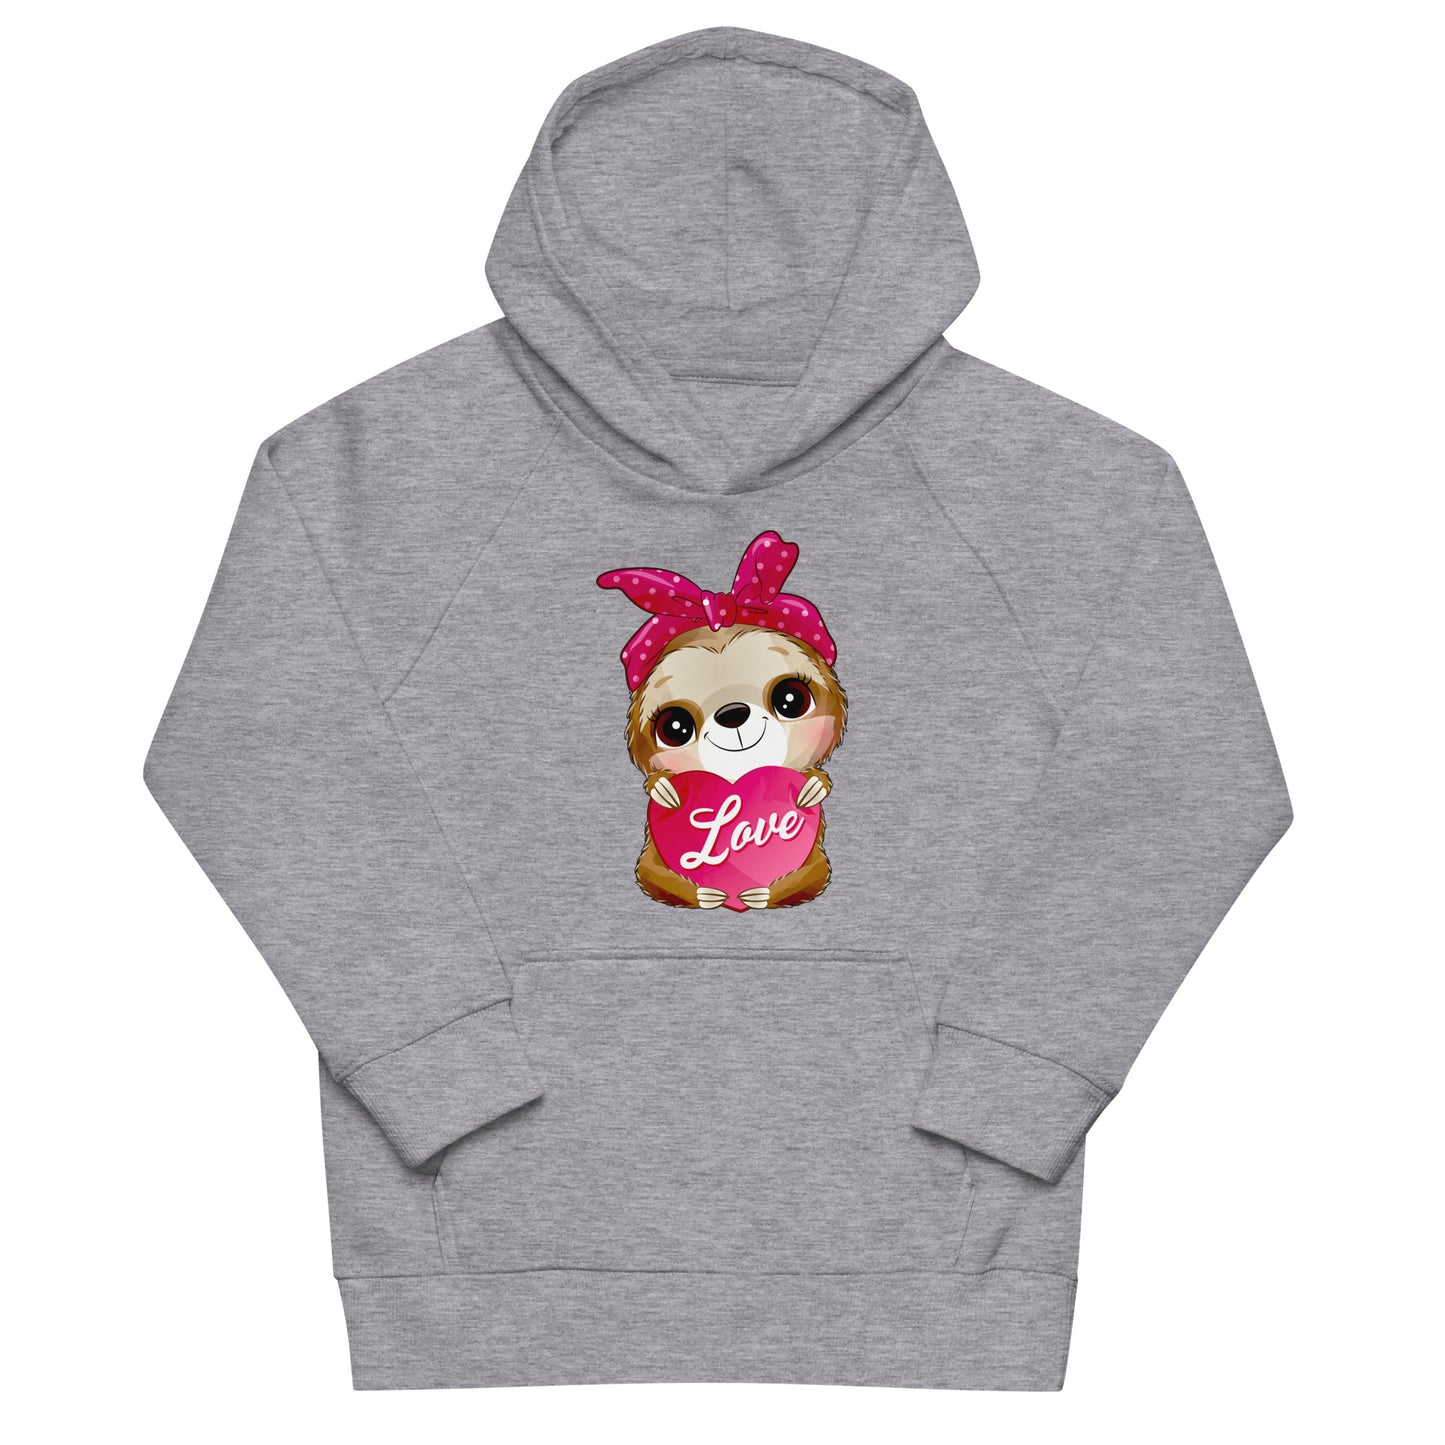 Sloth with Heart Hoodie, No. 0493